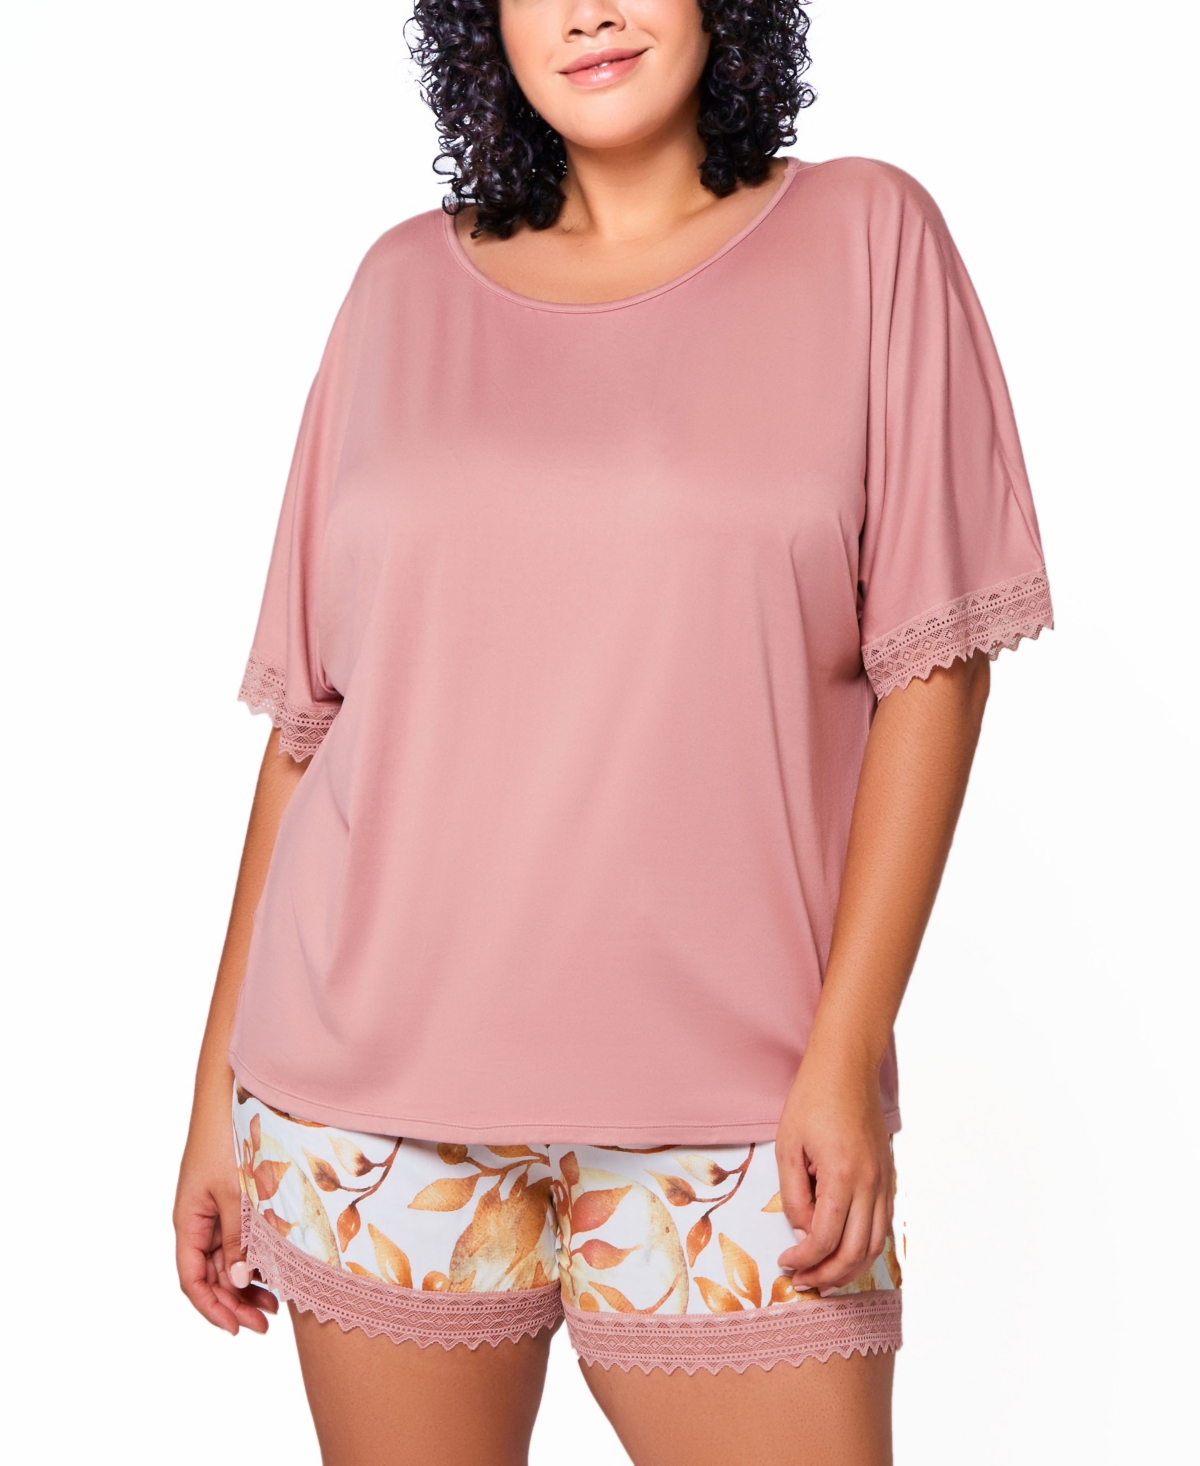 Icollection Plus Size 2pc. Soft Pajama Set Trimmed In Lace In Rose